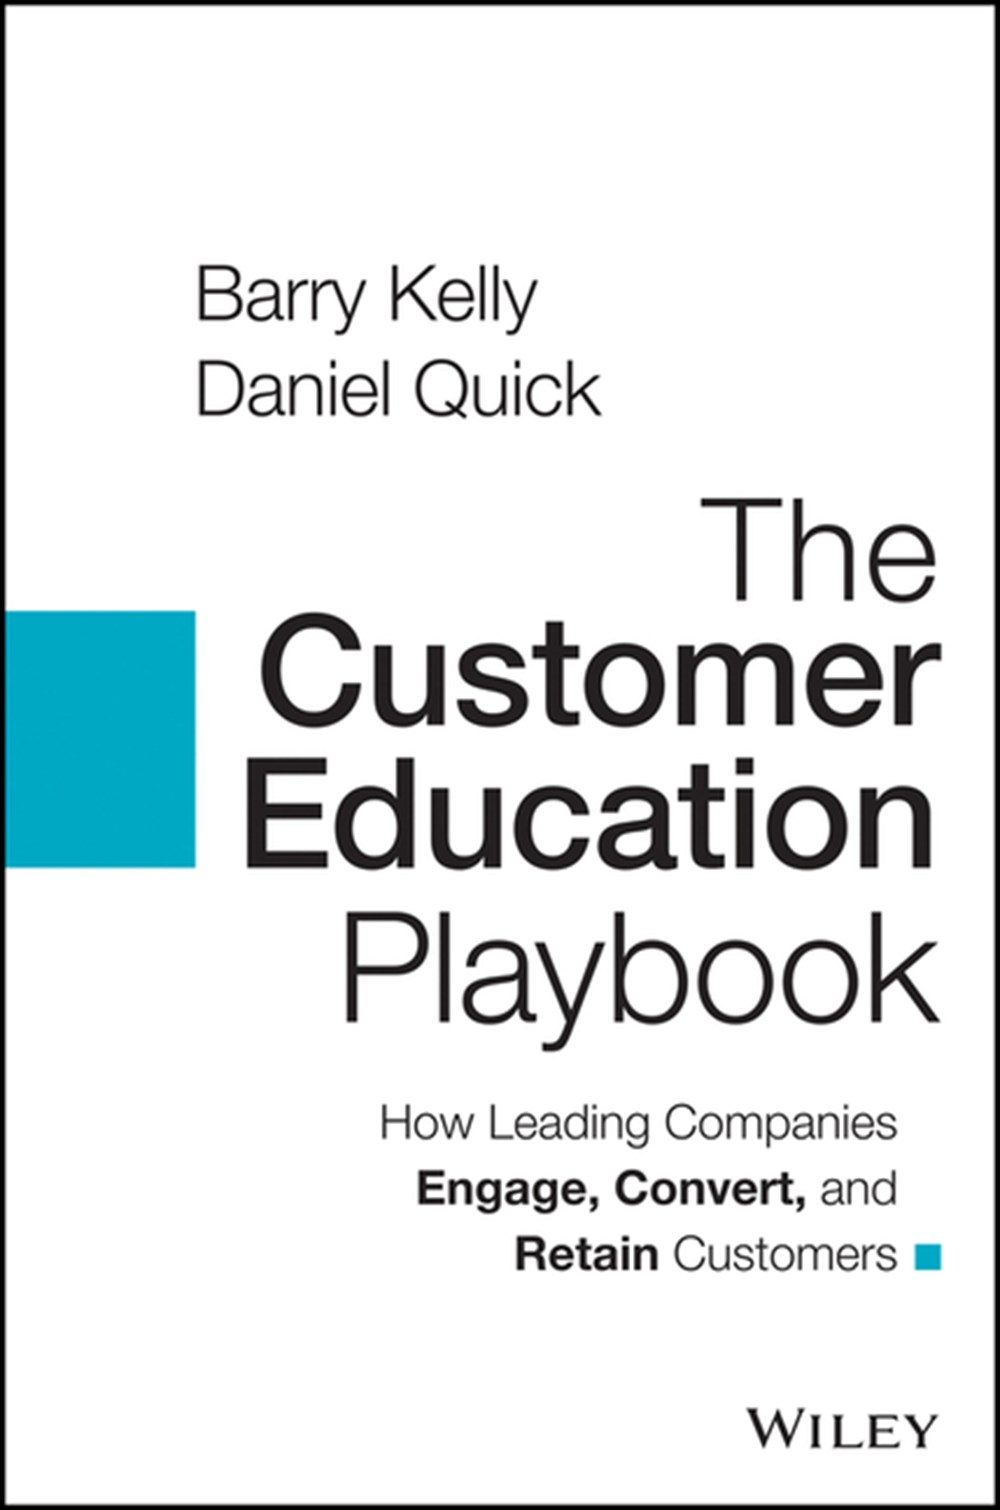 Customer Education Playbook How Leading Companies Engage, Convert, and Retain Customers